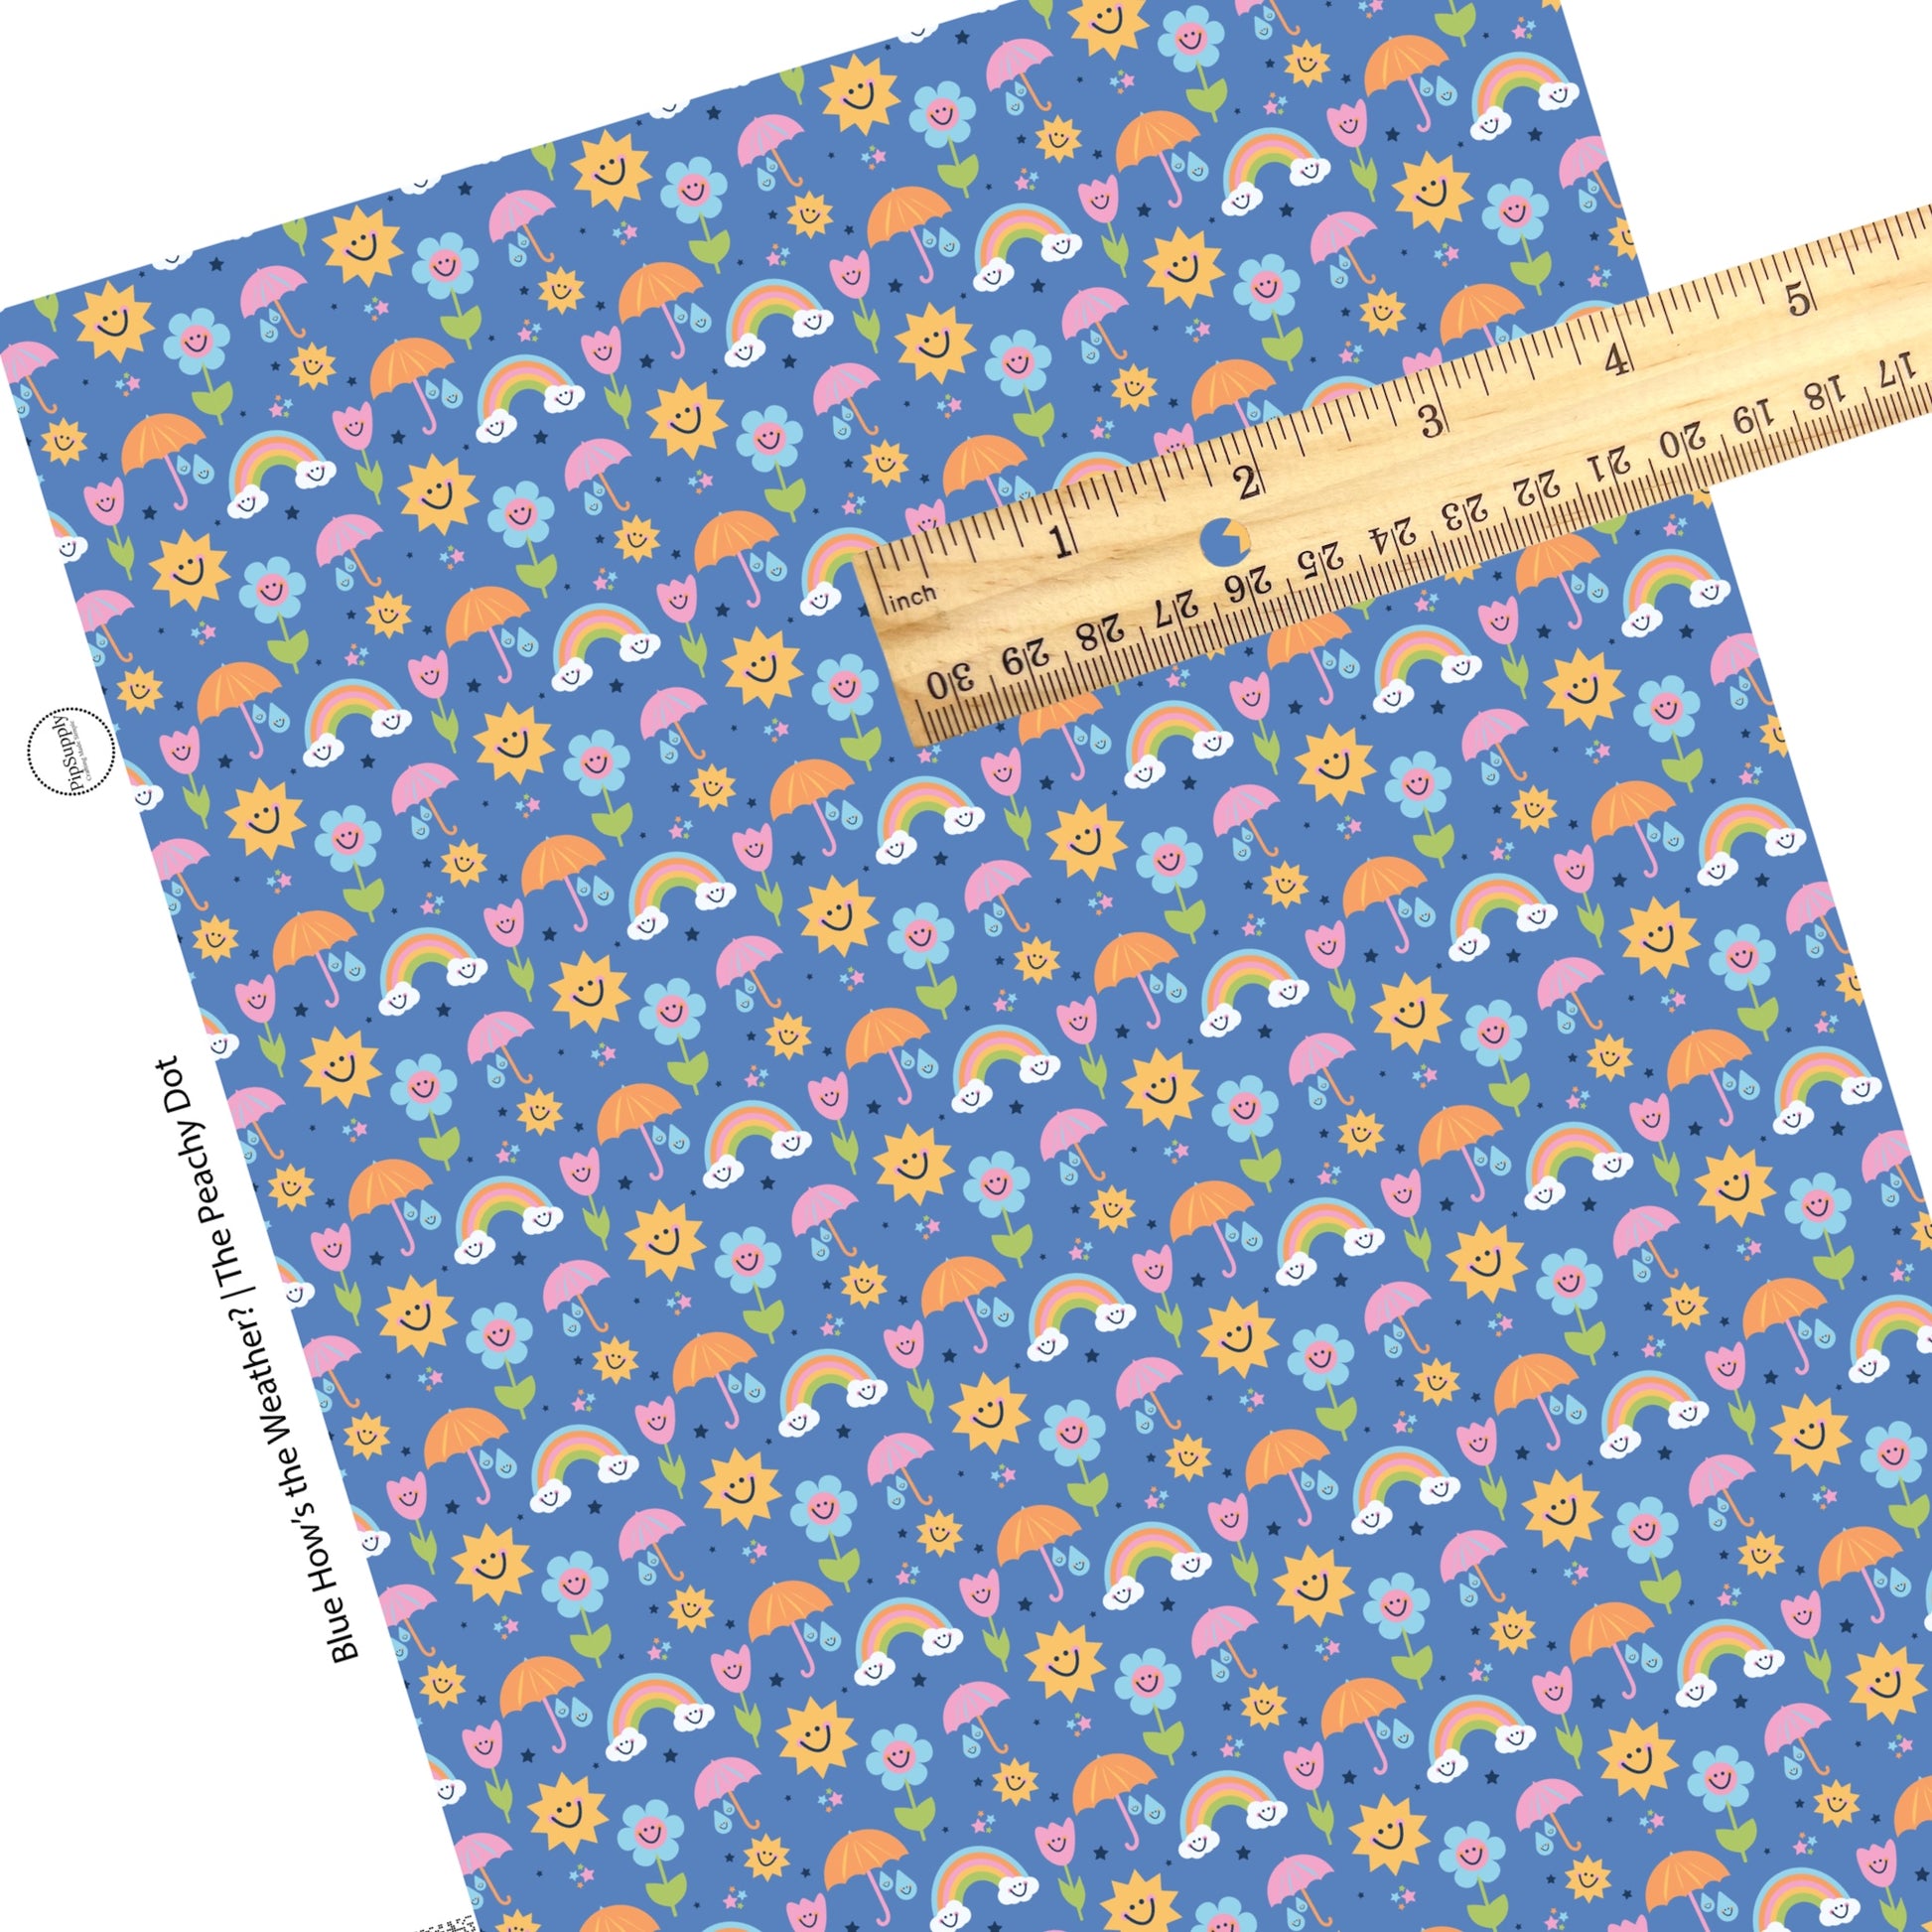 These spring floral pattern themed faux leather sheets contain the following design elements: colorful flowers, rainbows, suns, umbrellas, and smiley faces on blue. Our CPSIA compliant faux leather sheets or rolls can be used for all types of crafting projects.